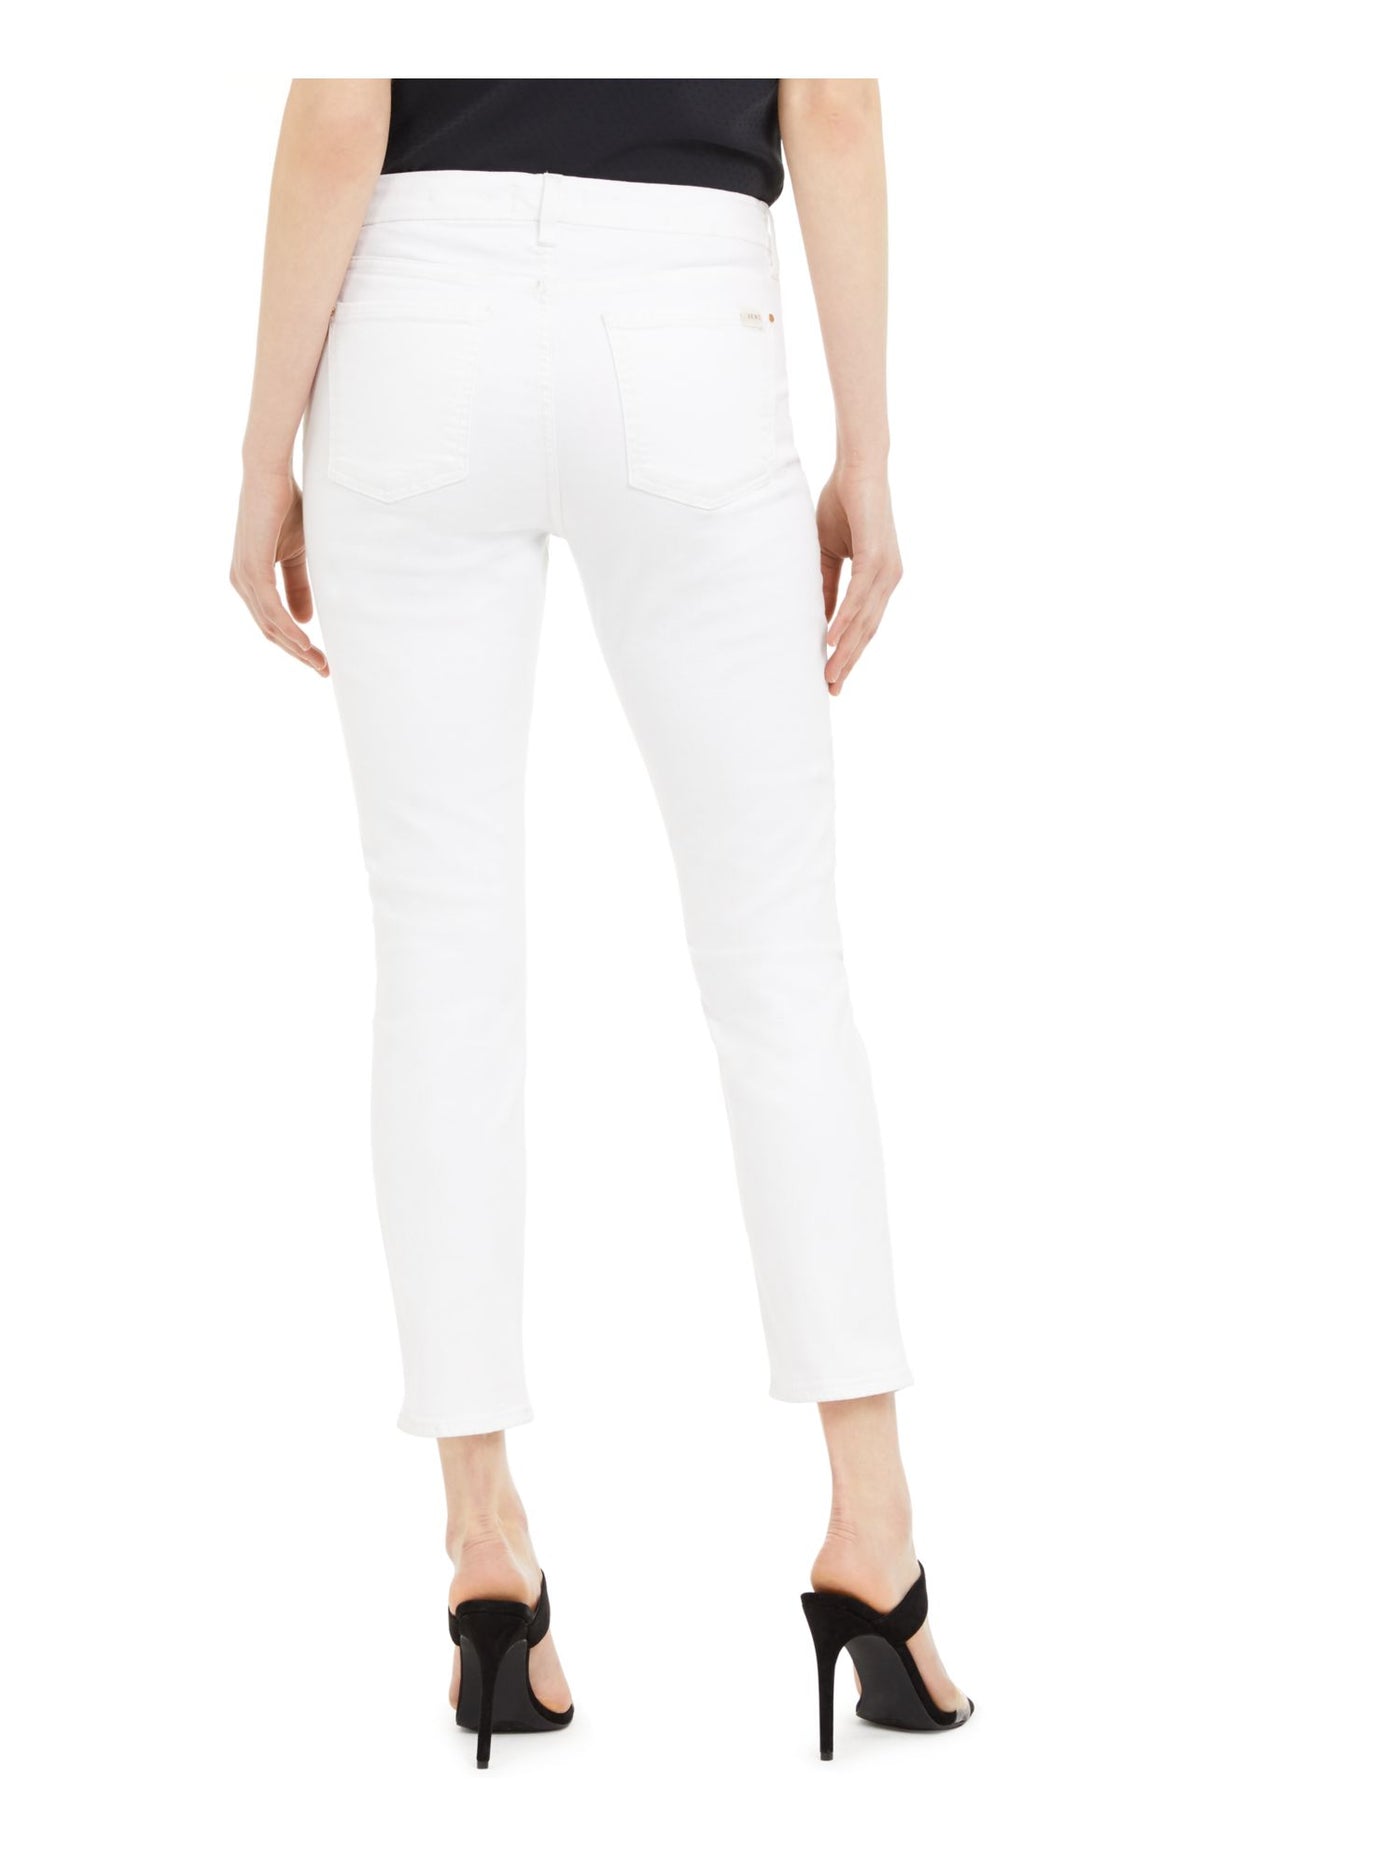 Jen 7 Womens White Zippered Pocketed High Rise Ankle Skinny Jeans 18